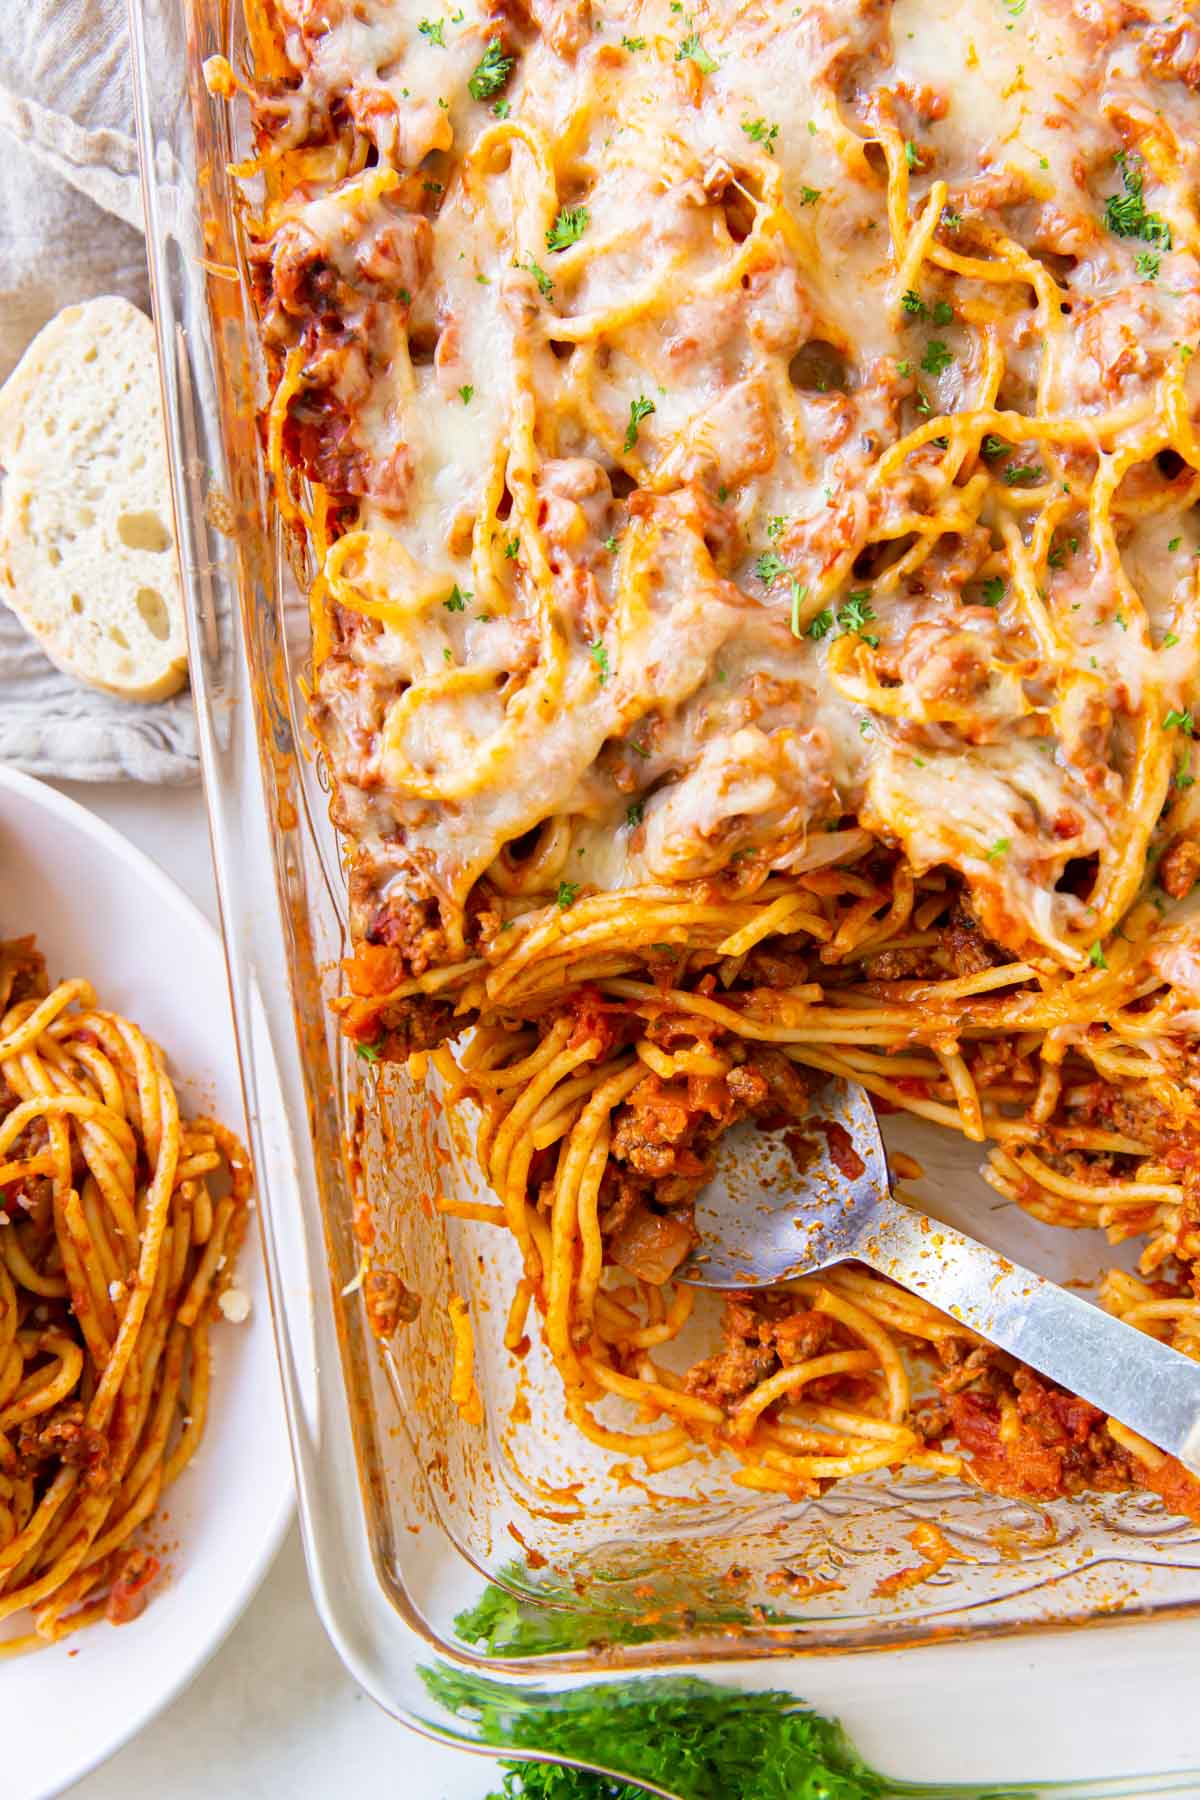 Baked spaghetti in casserole dish with serving spoon.